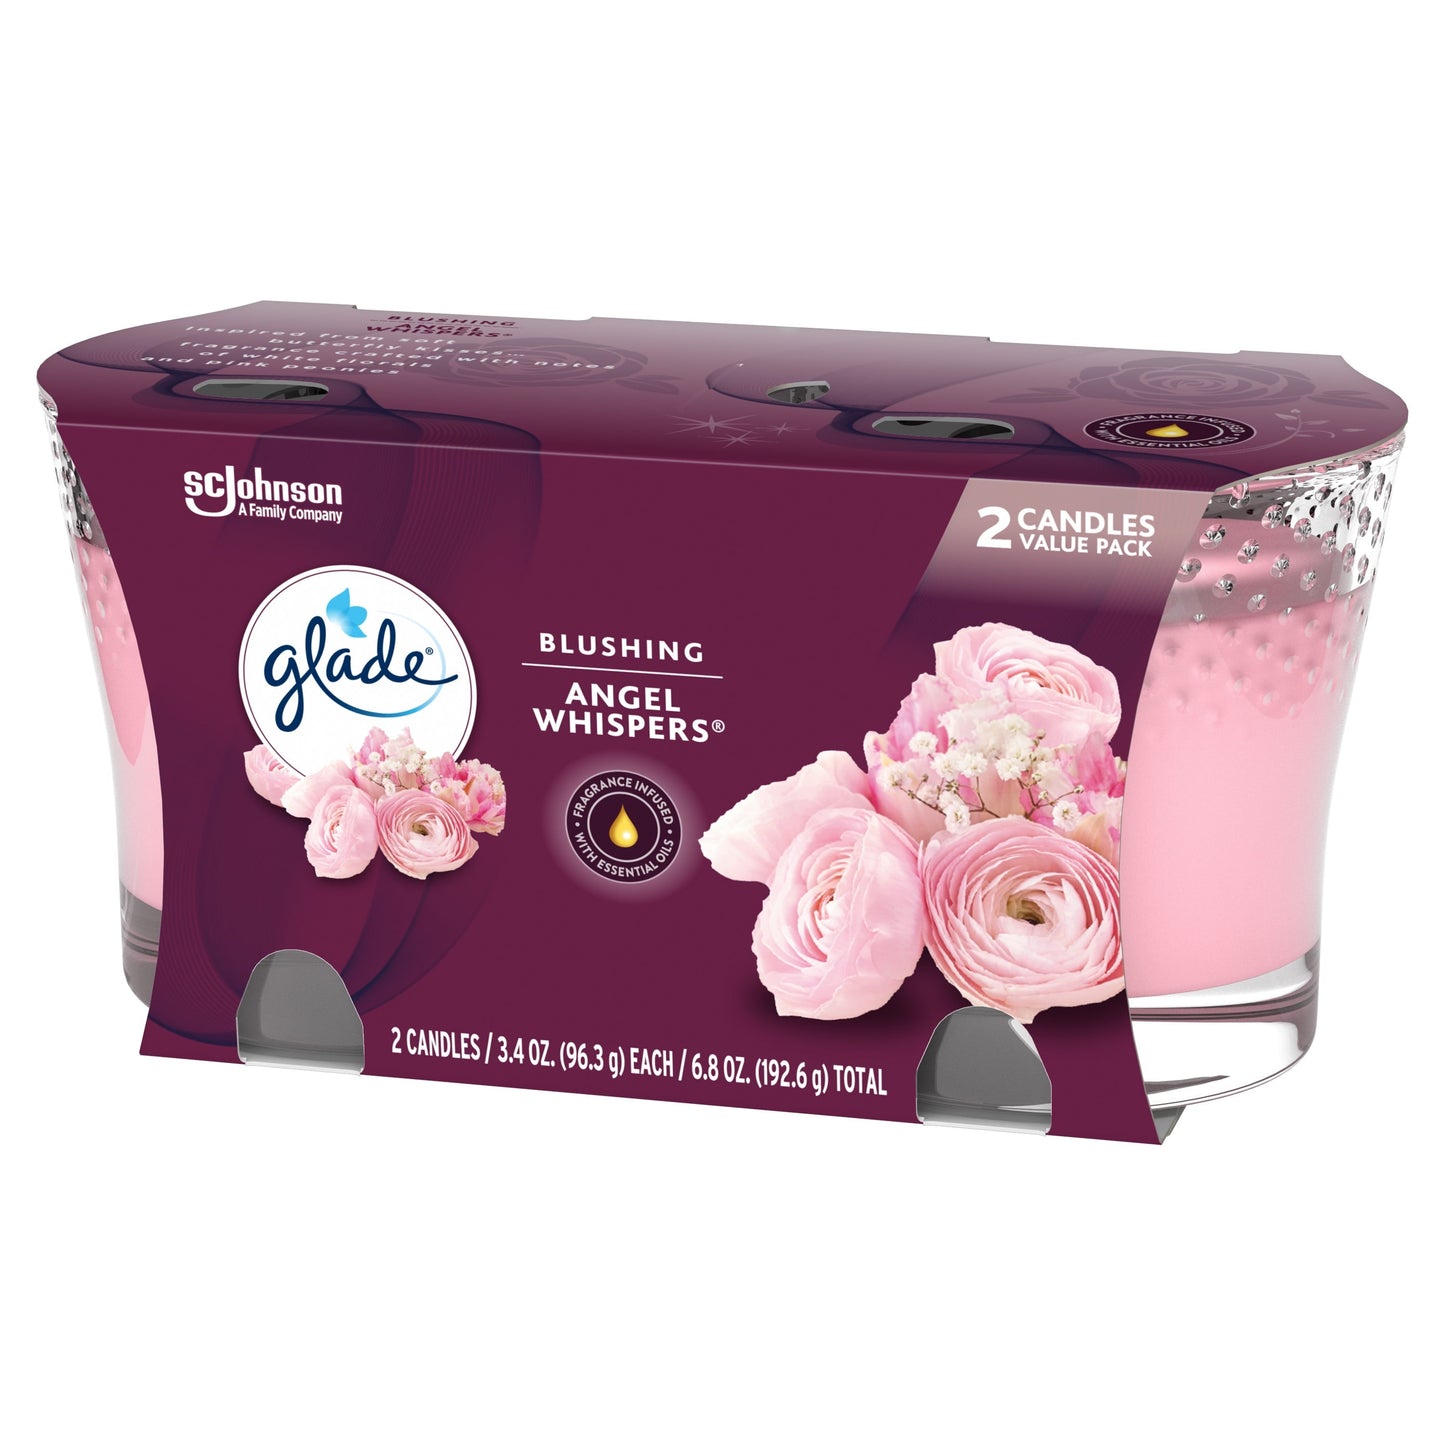 Glade Candle Angel Whispers Scent, 1-Wick, 3.4 oz (96.3 g) Each, 2 Counts, Fragrance Infused with Essential Oils, Notes of Bulgarian Rose, Peach, White Floral Bouquet, Lead-Free Wick Scented Candles